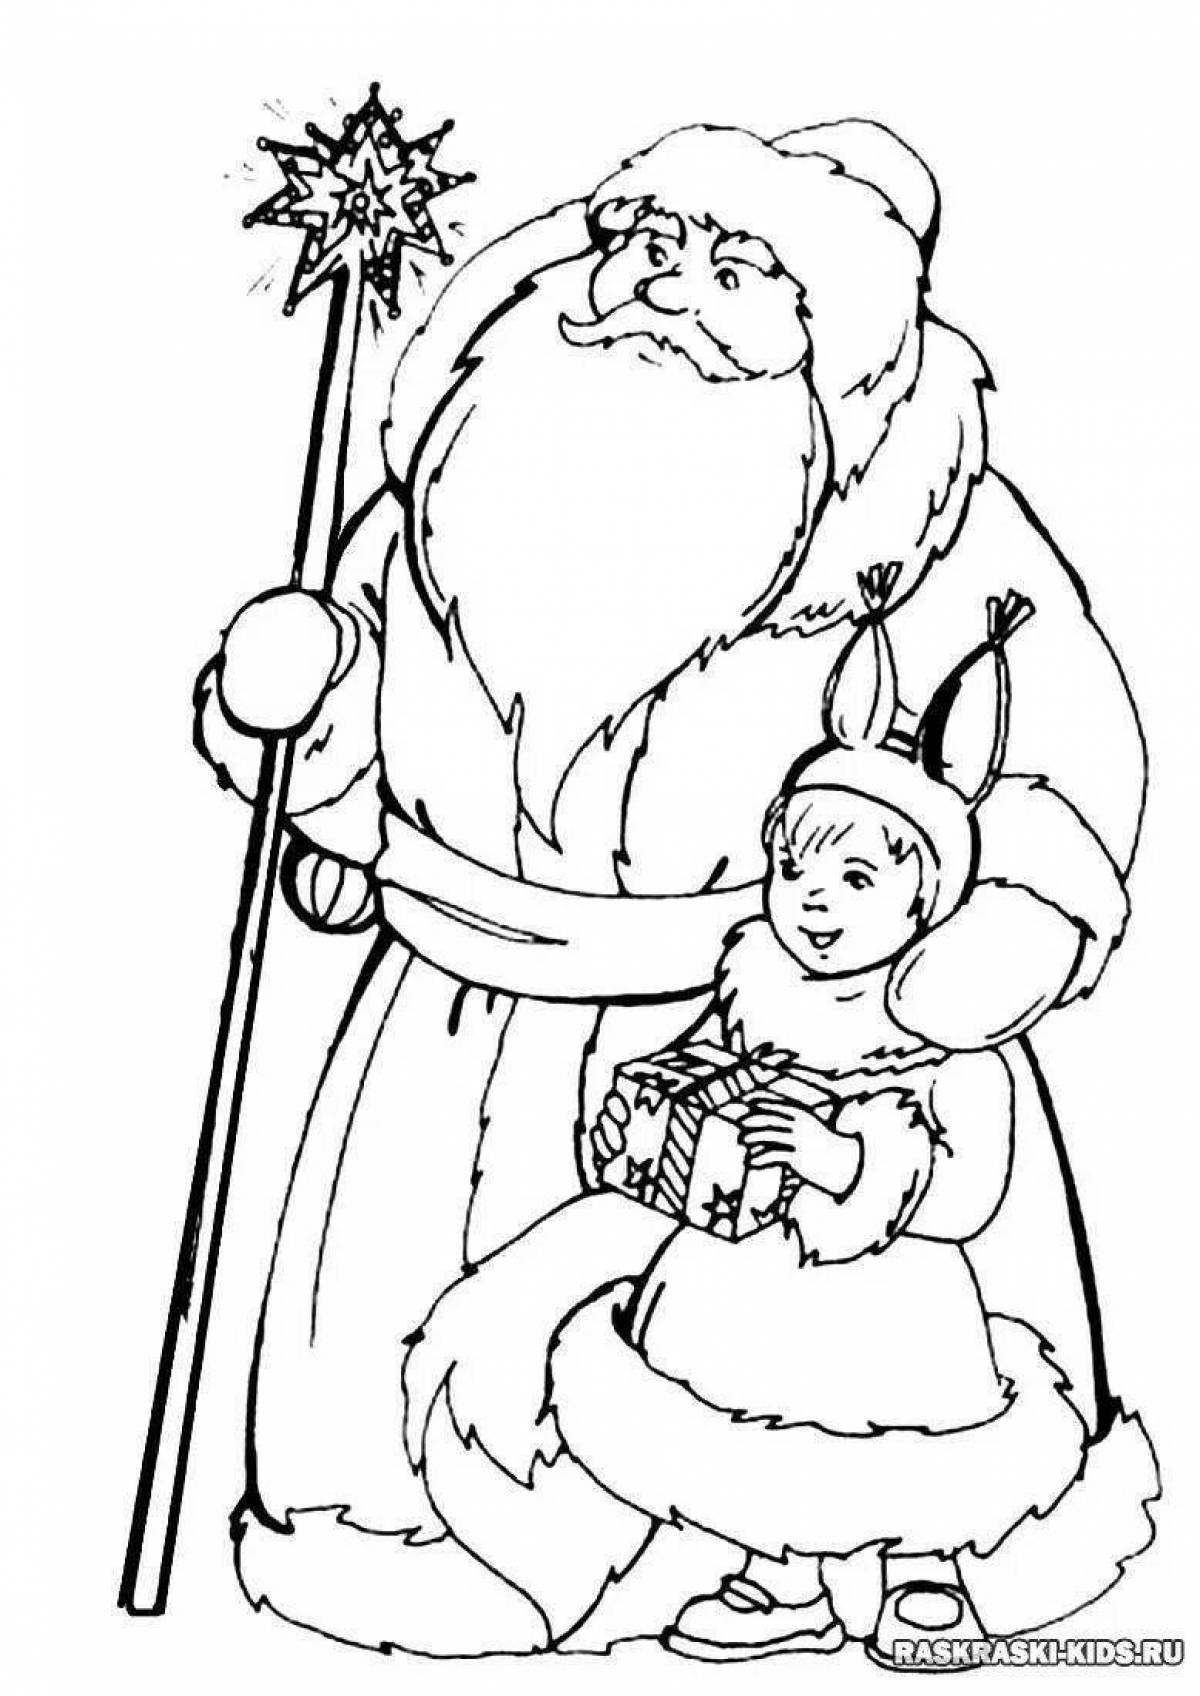 Fabulous santa claus and snow maiden christmas coloring book